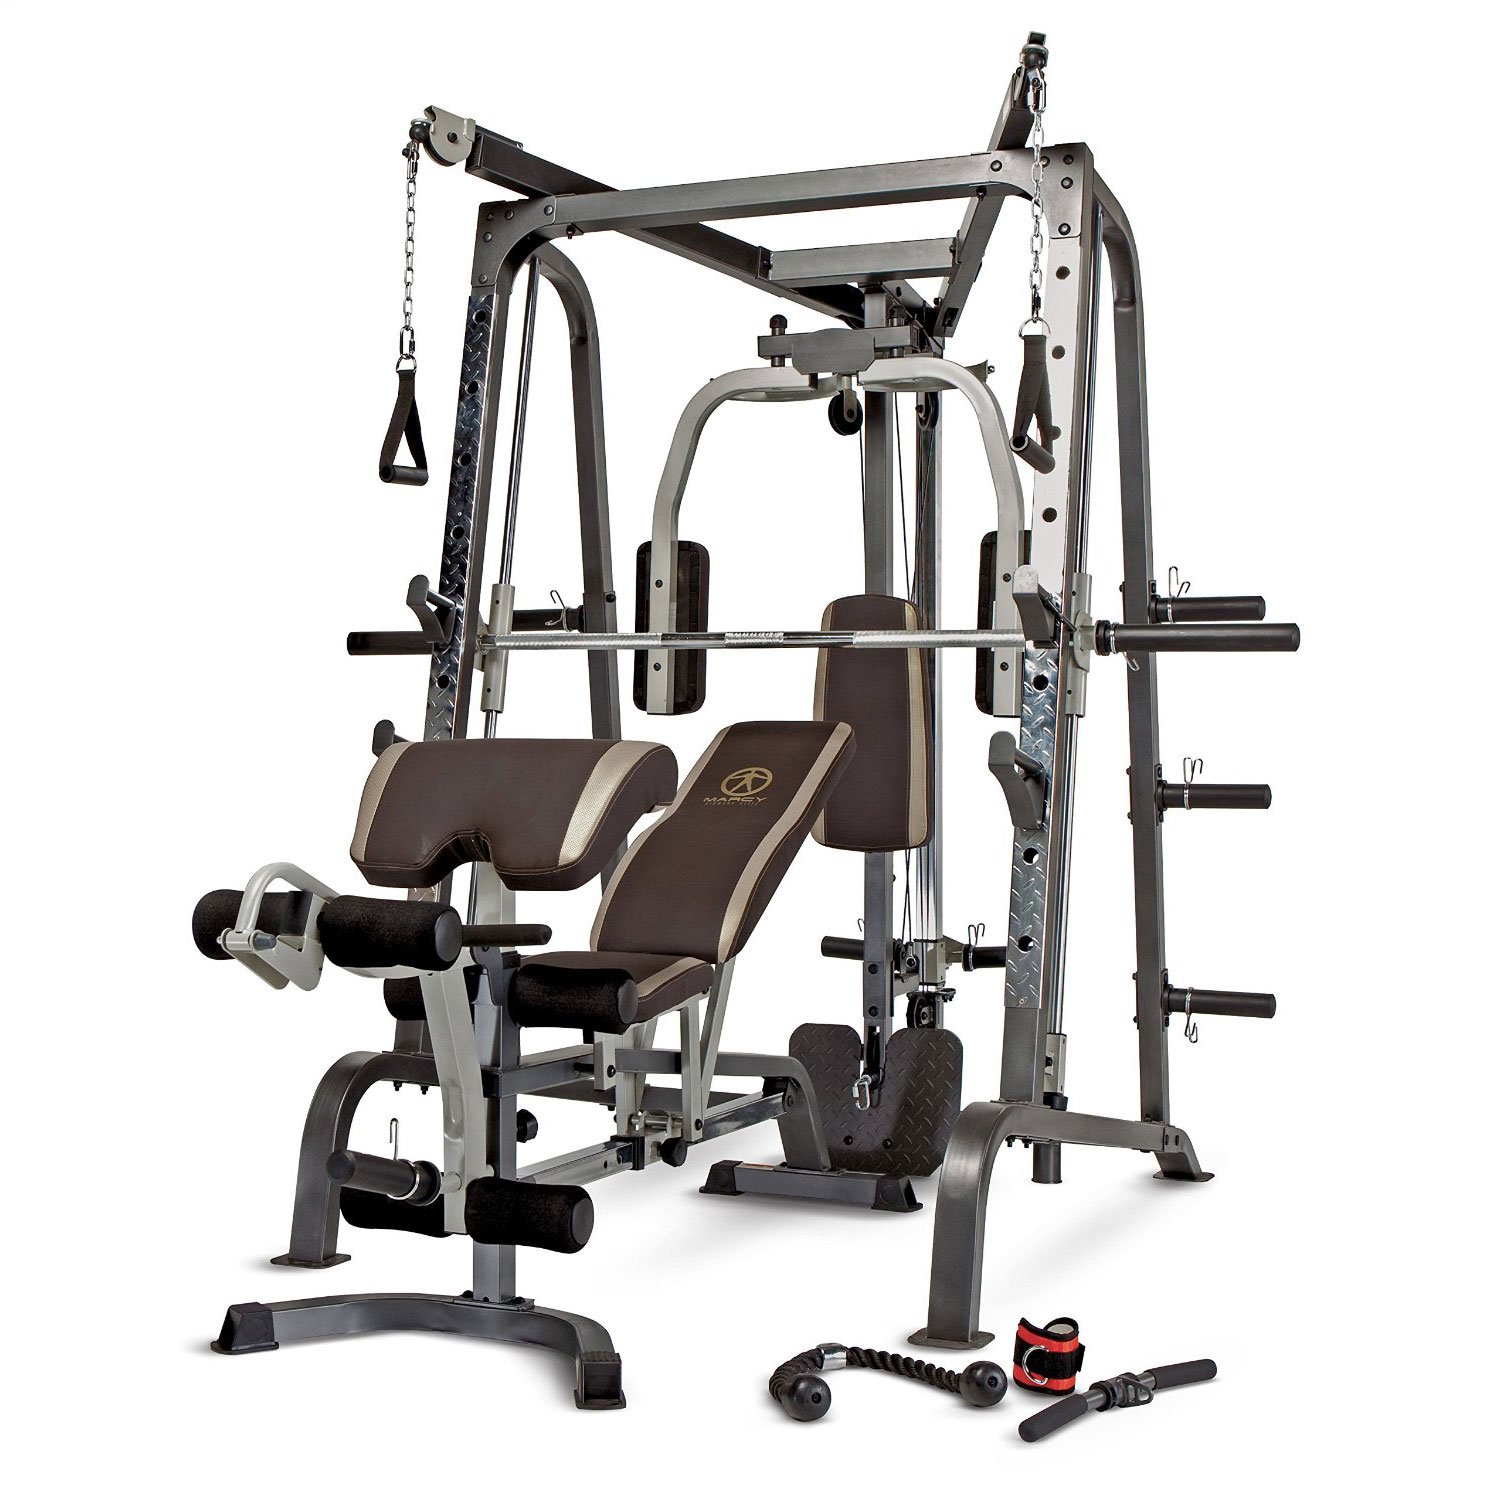 Marcy Diamond Elite Olympic Smith Cage Machine, Plate Loaded Home Gym Total Body Workout Machine (MD-9010G) - image 5 of 13